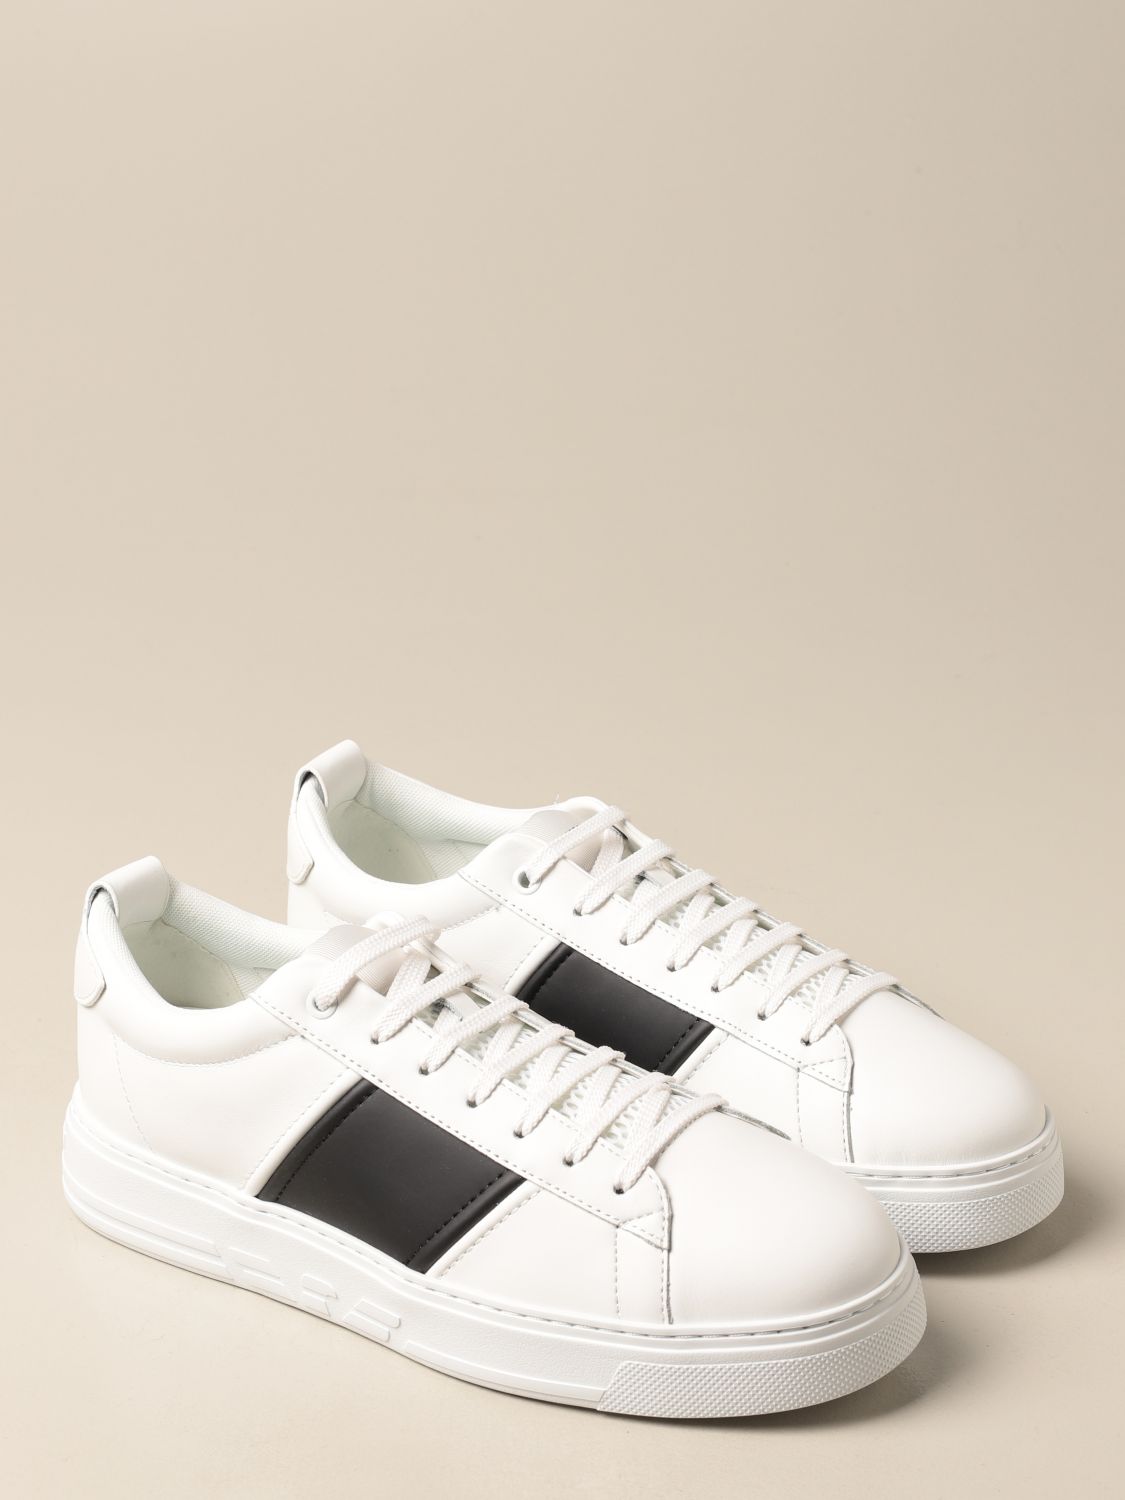 Emporio Armani Outlet: sneakers in leather with contrasting band ...